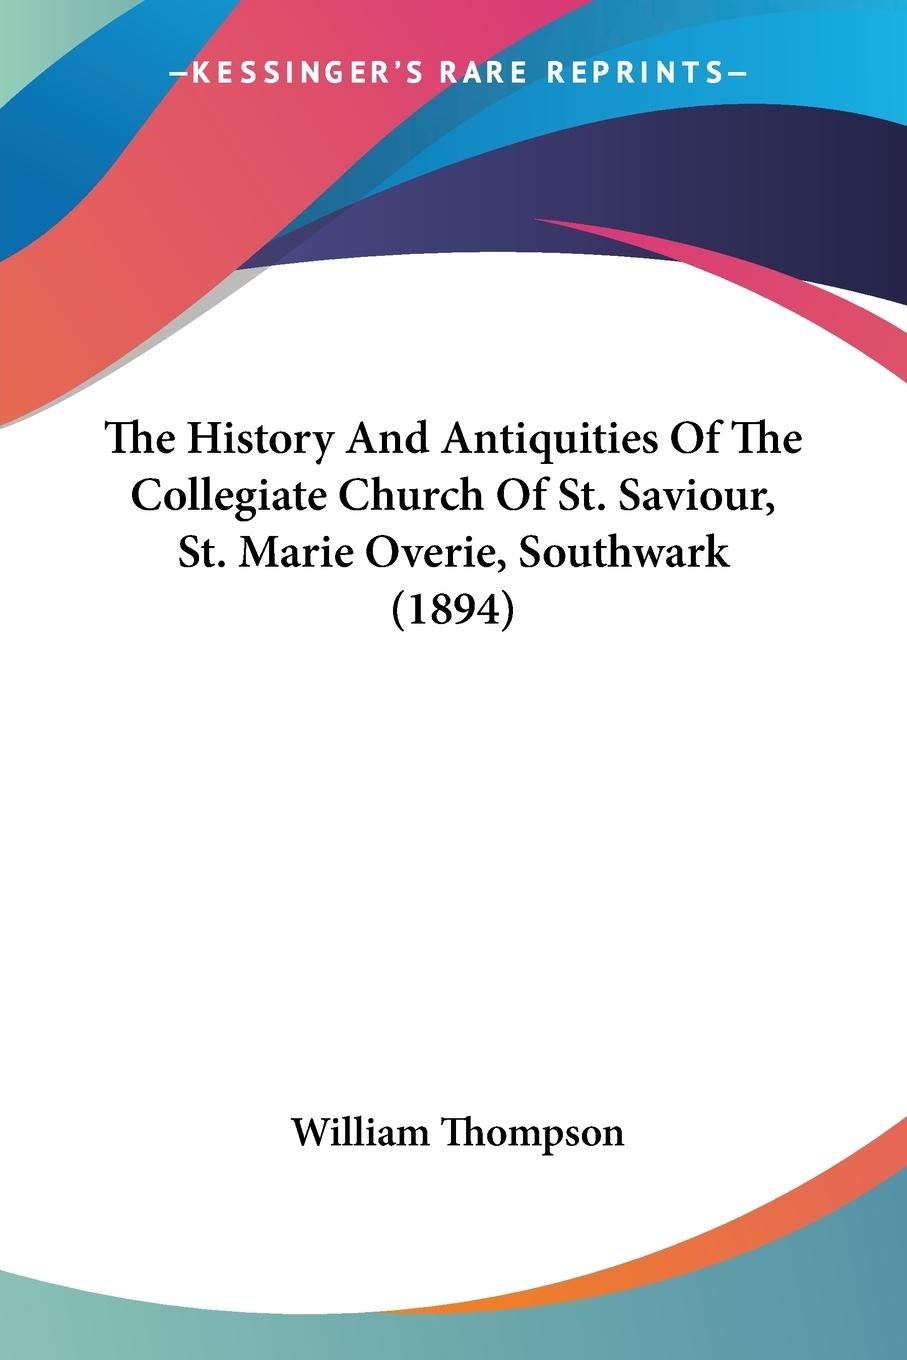 The History And Antiquities Of The Collegiate Church Of St. Saviour, St. Marie Overie, Southwark (1894)